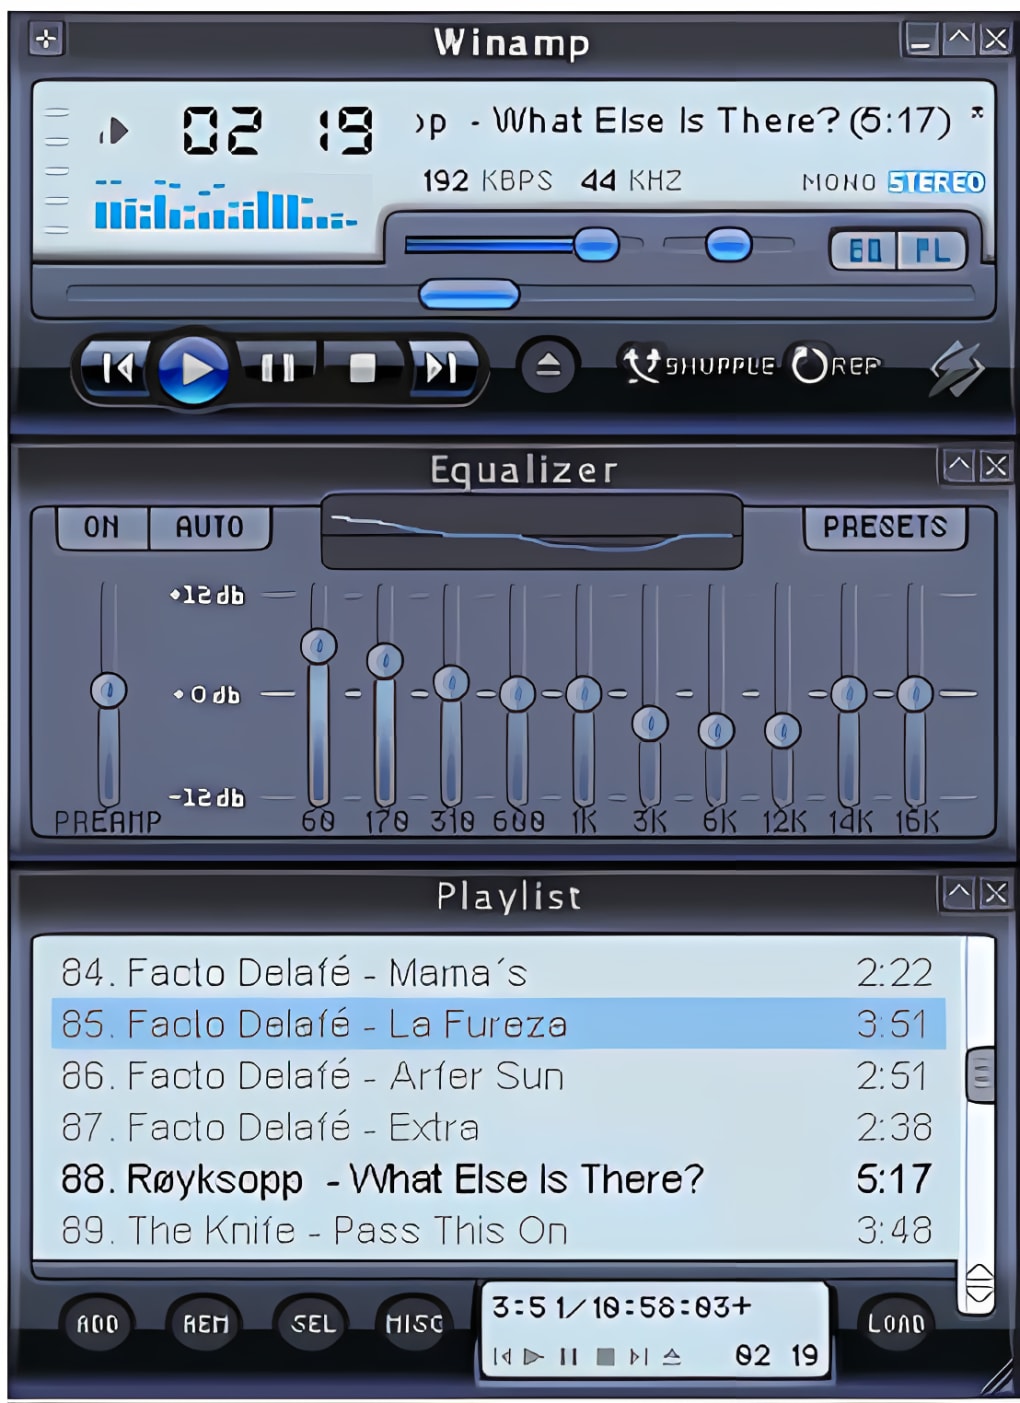 skins mmd32 pour winamp